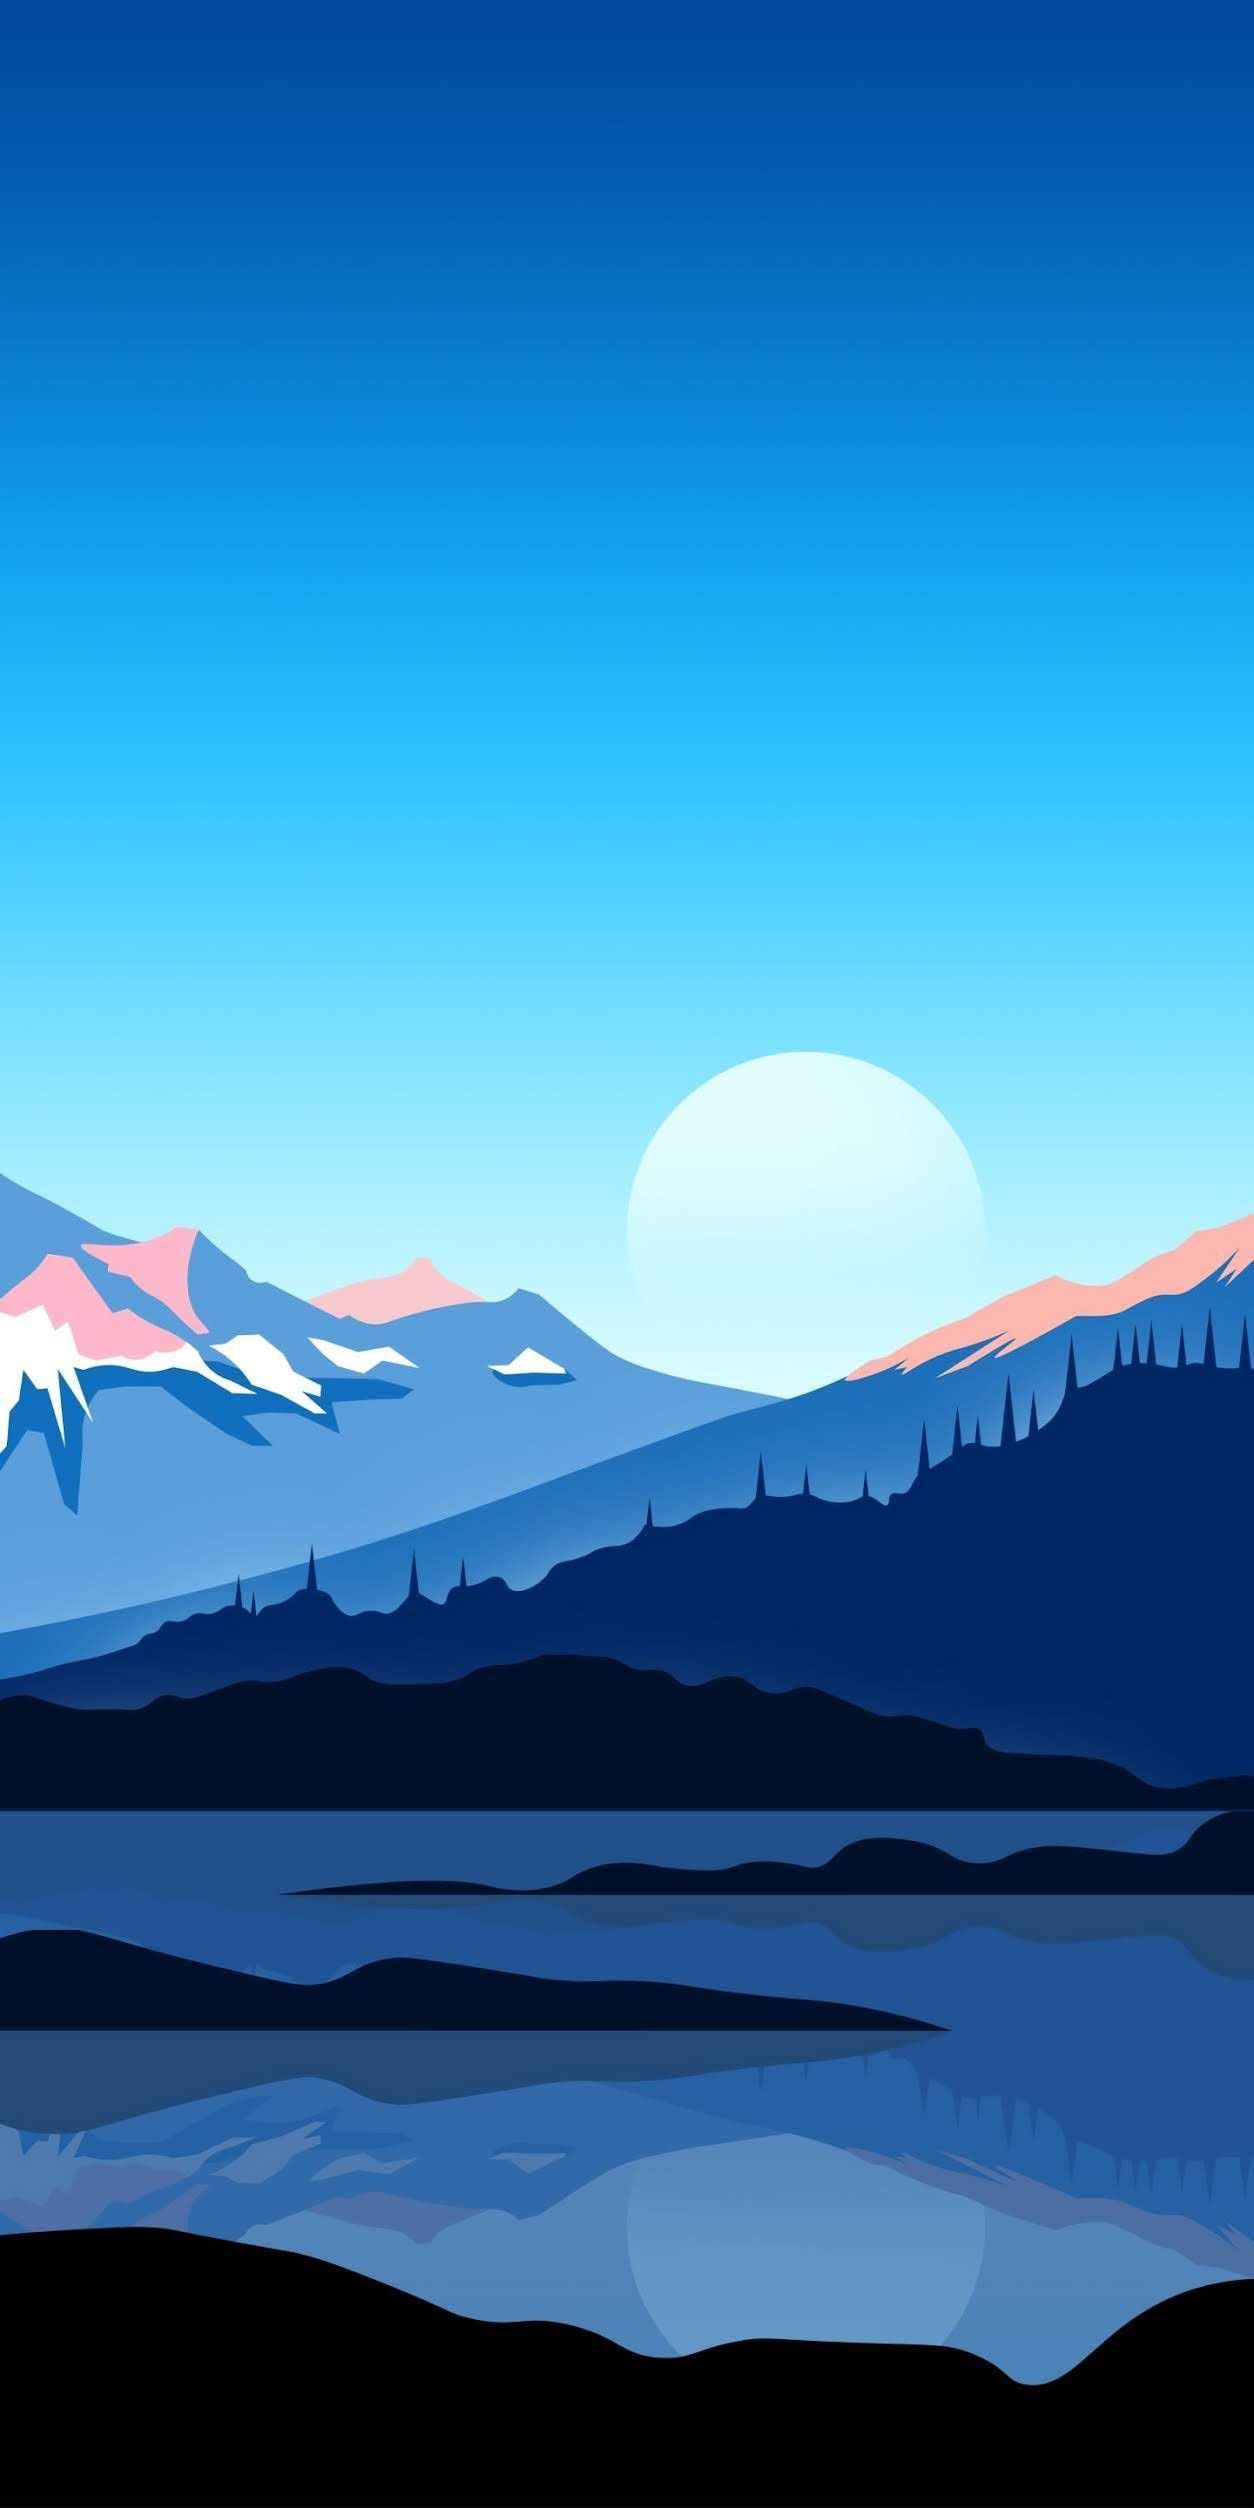 Download Latest Blue Wallpaper for Android Phone This Month. Scenery wallpaper, Landscape wallpaper, Minimalist wallpaper